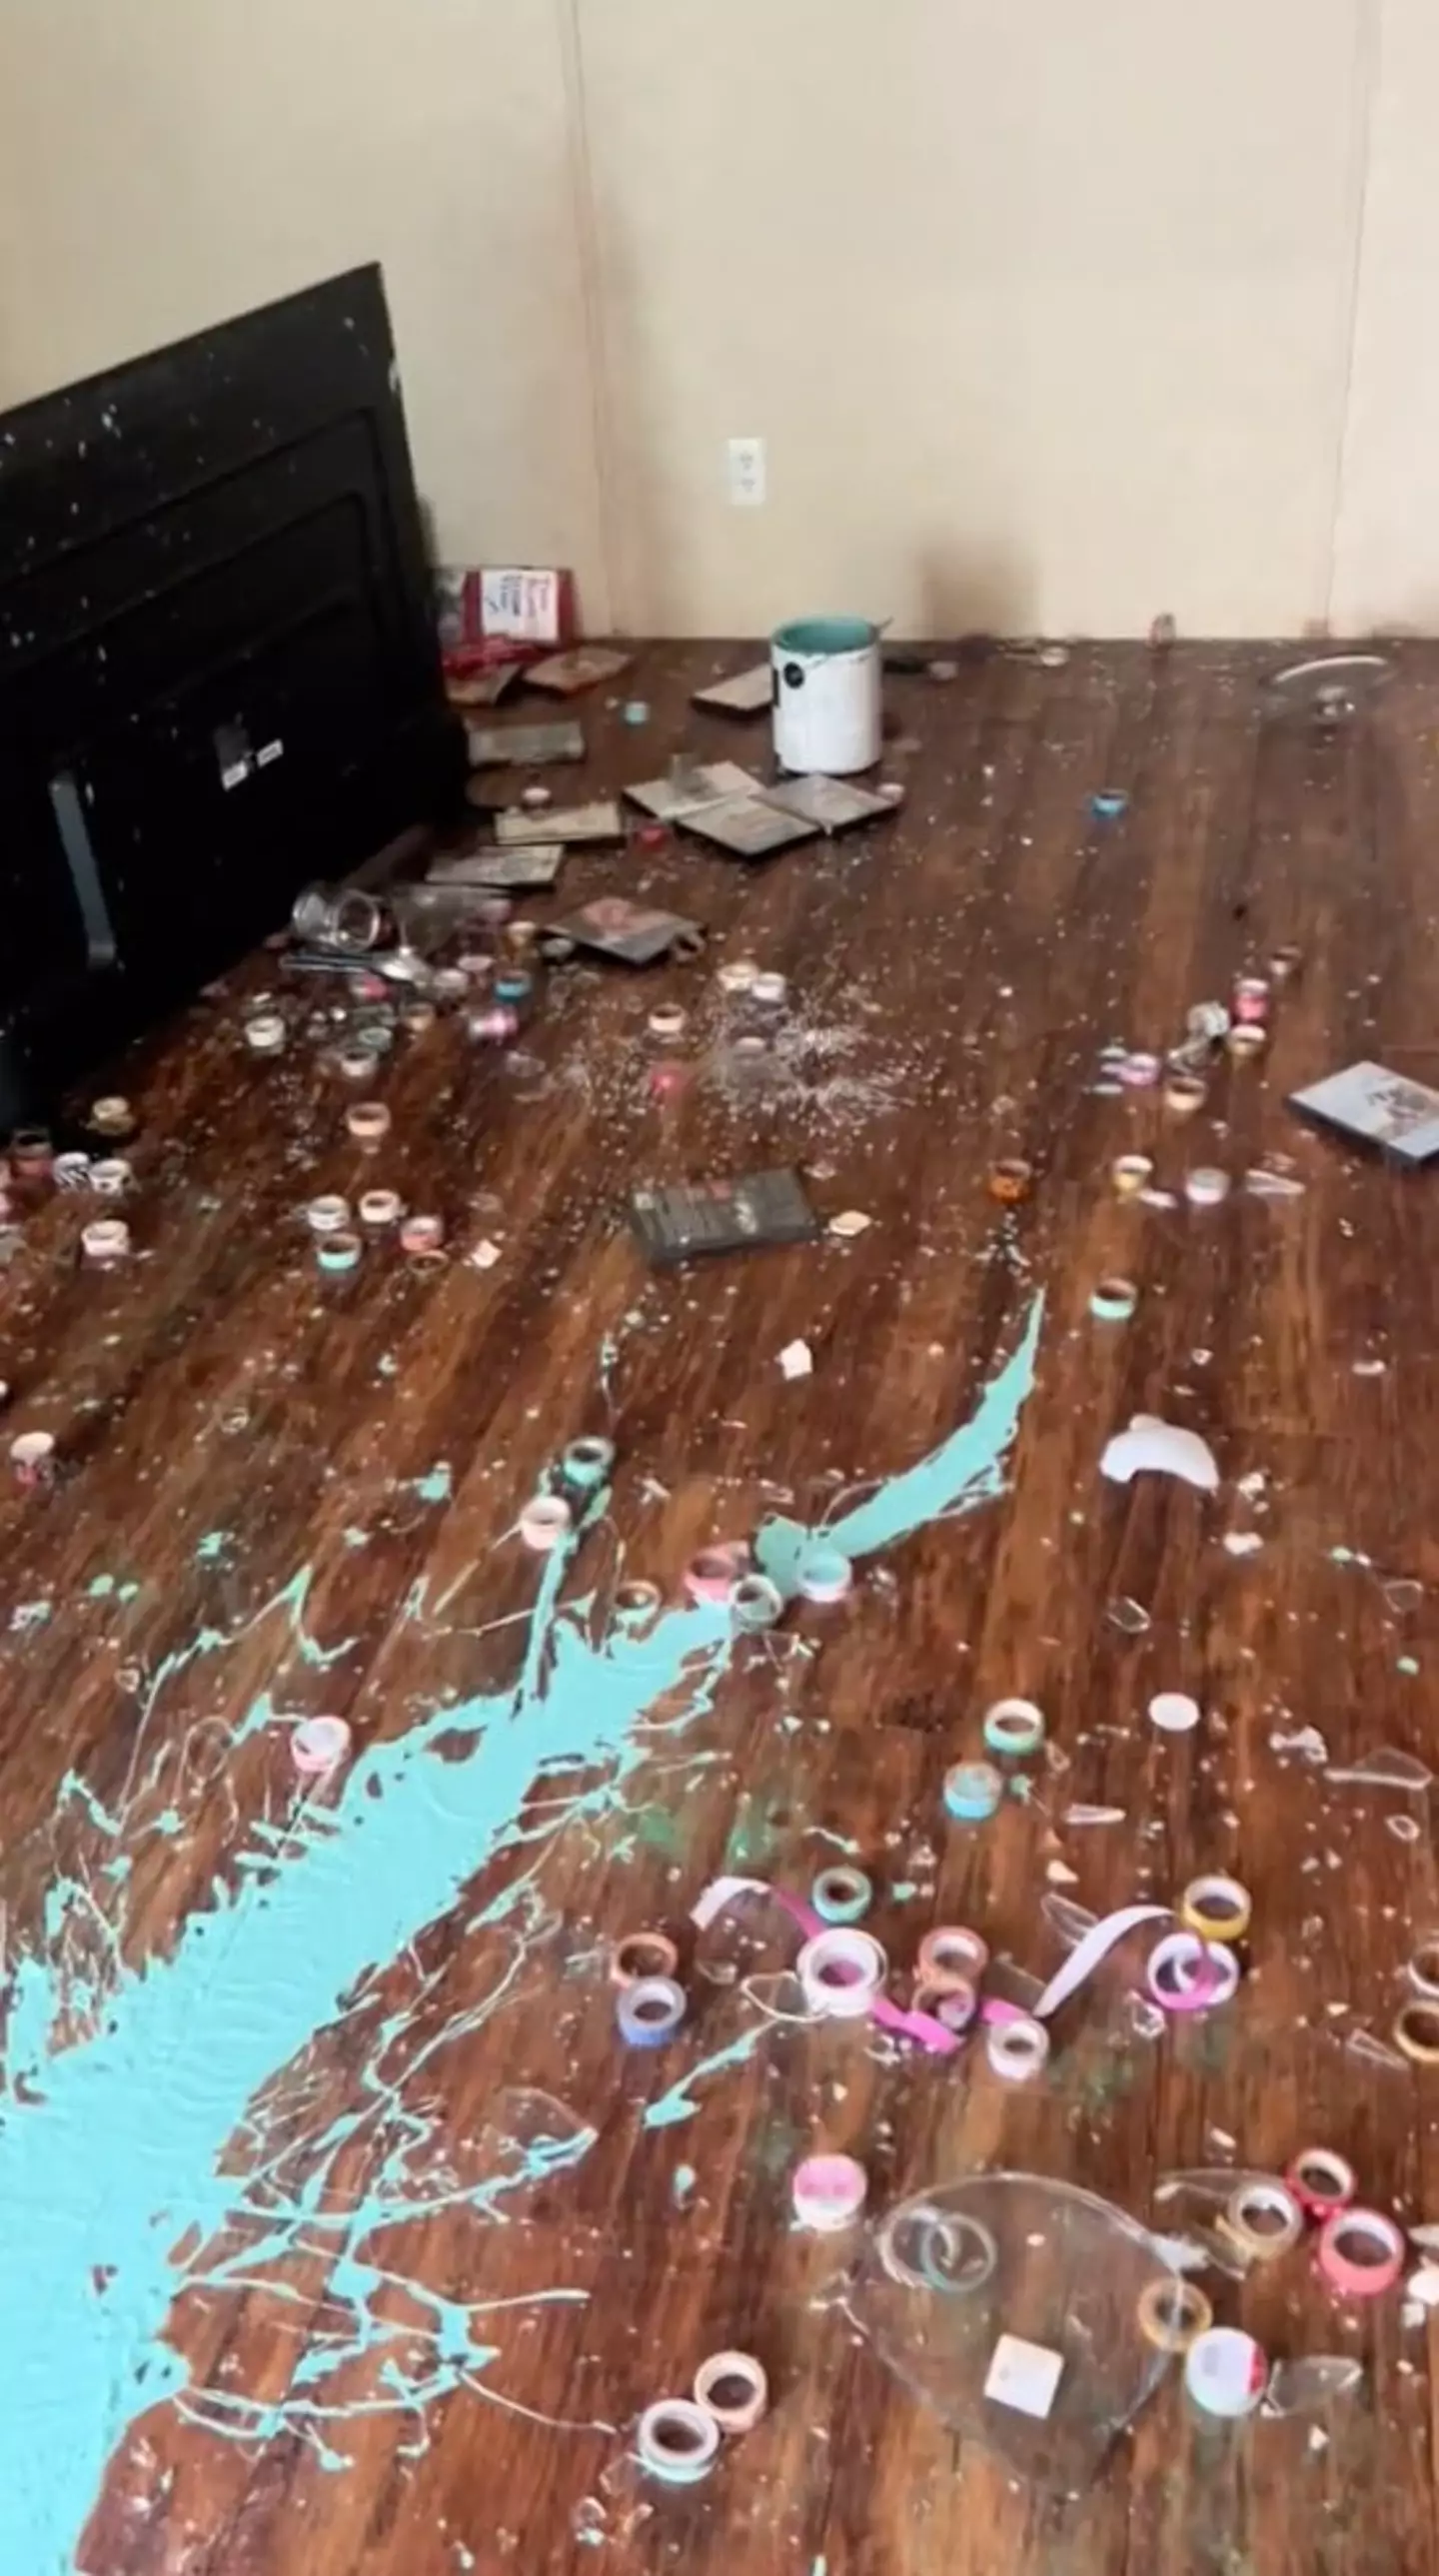 A family member was left shocked after she claims her 'spiteful' sister completely trashed her Texas home.